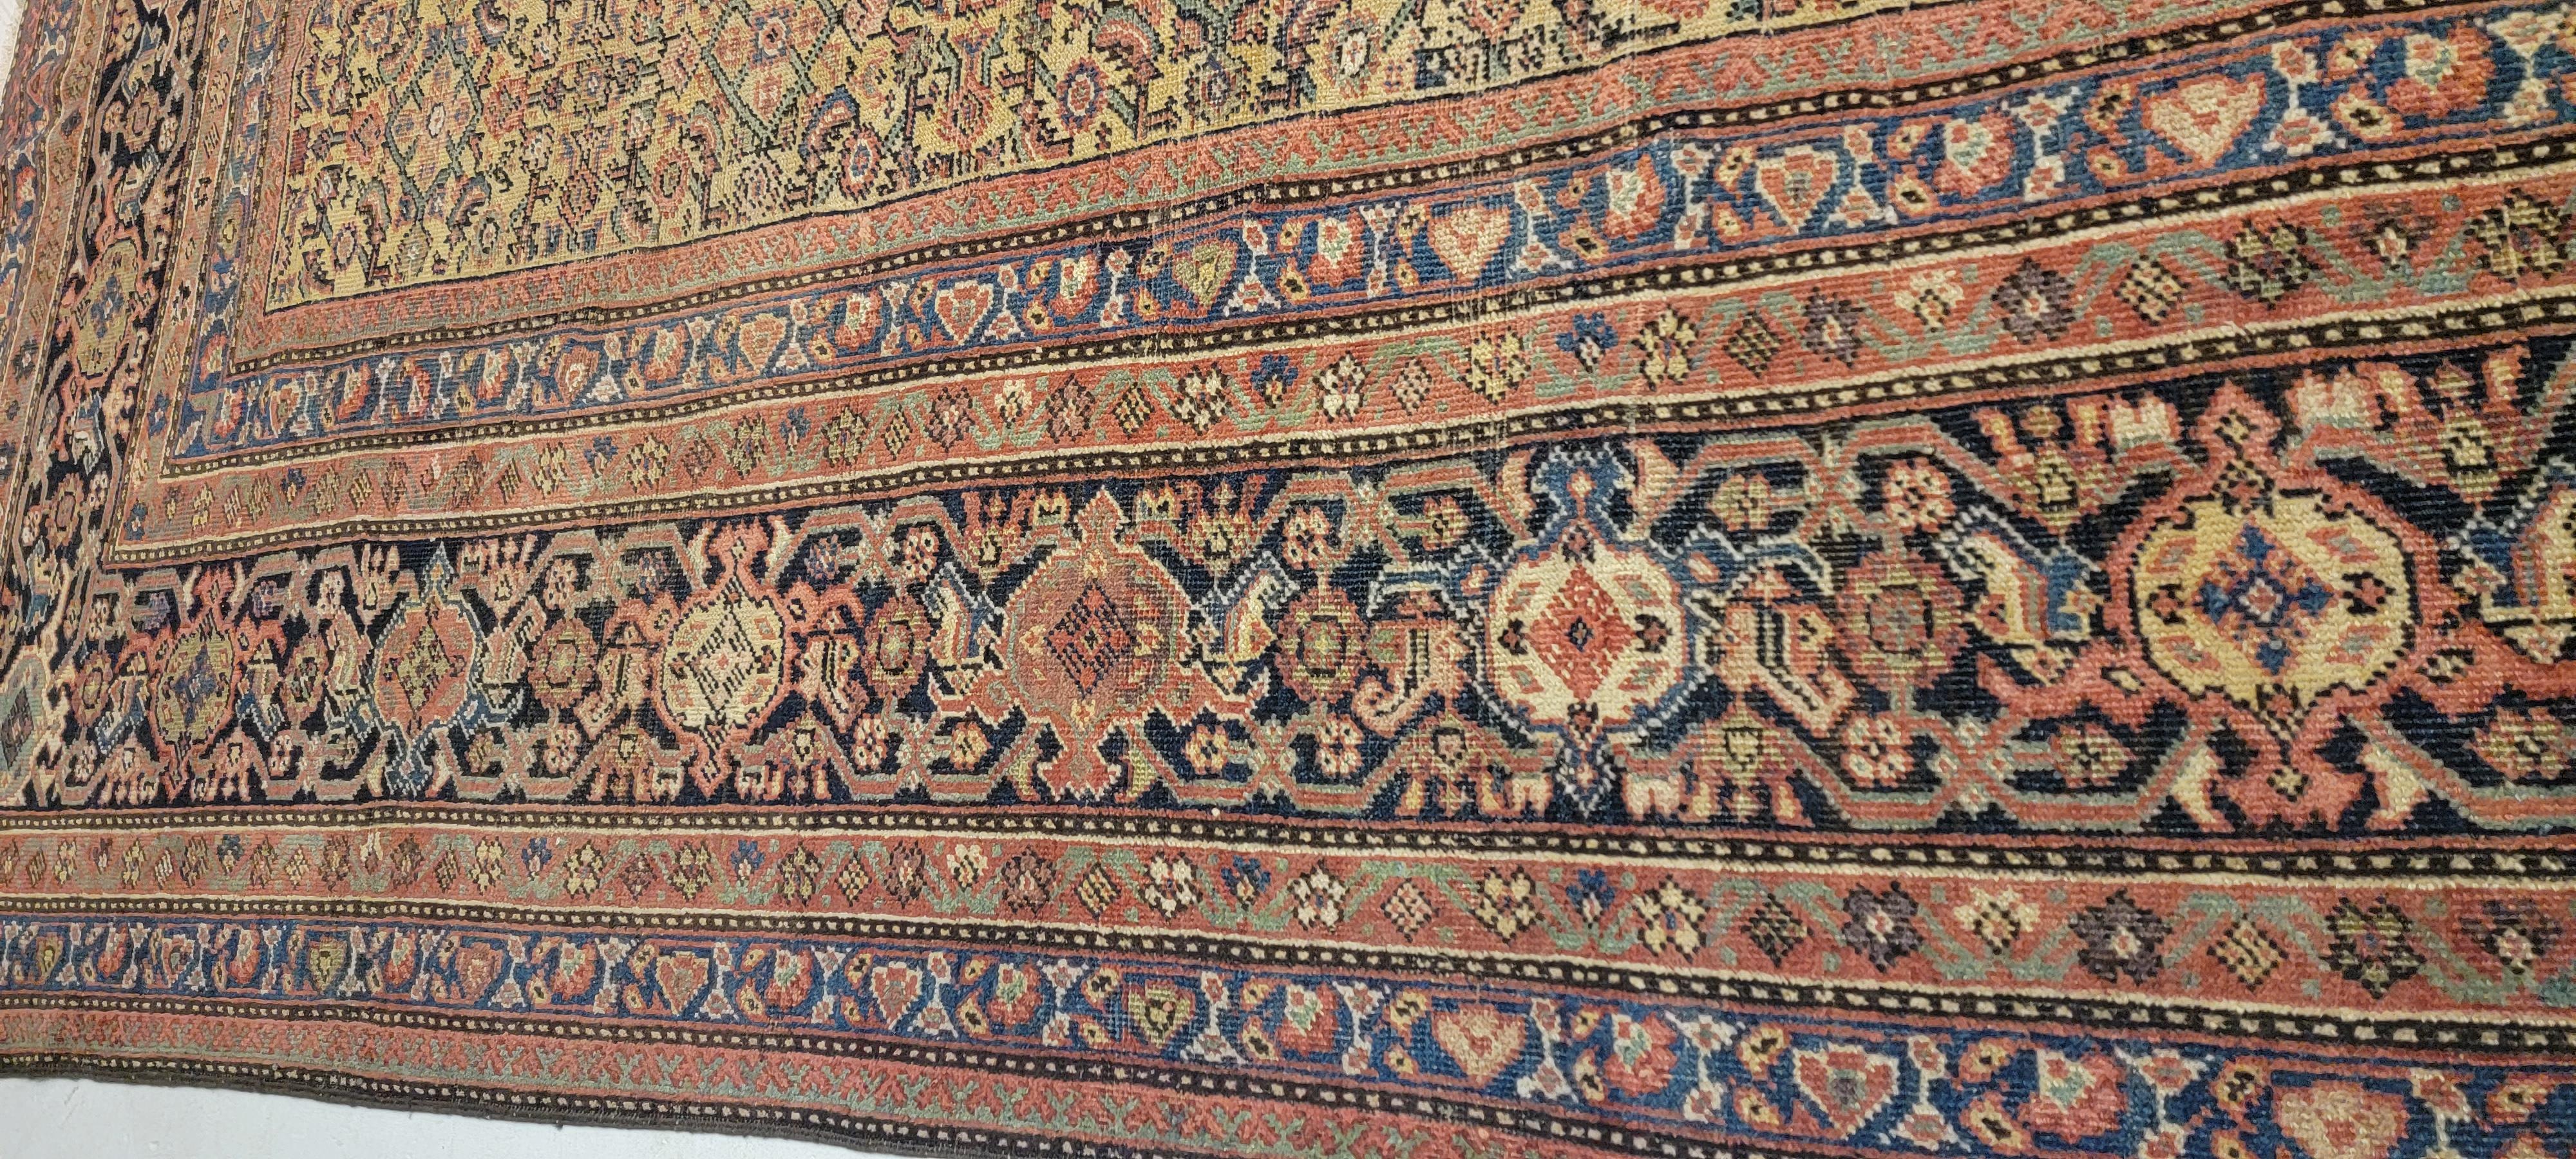 Late 19th Century Antique Persian Sultanabad/Meshkabad Rug In Good Condition For Sale In Chamblee, GA